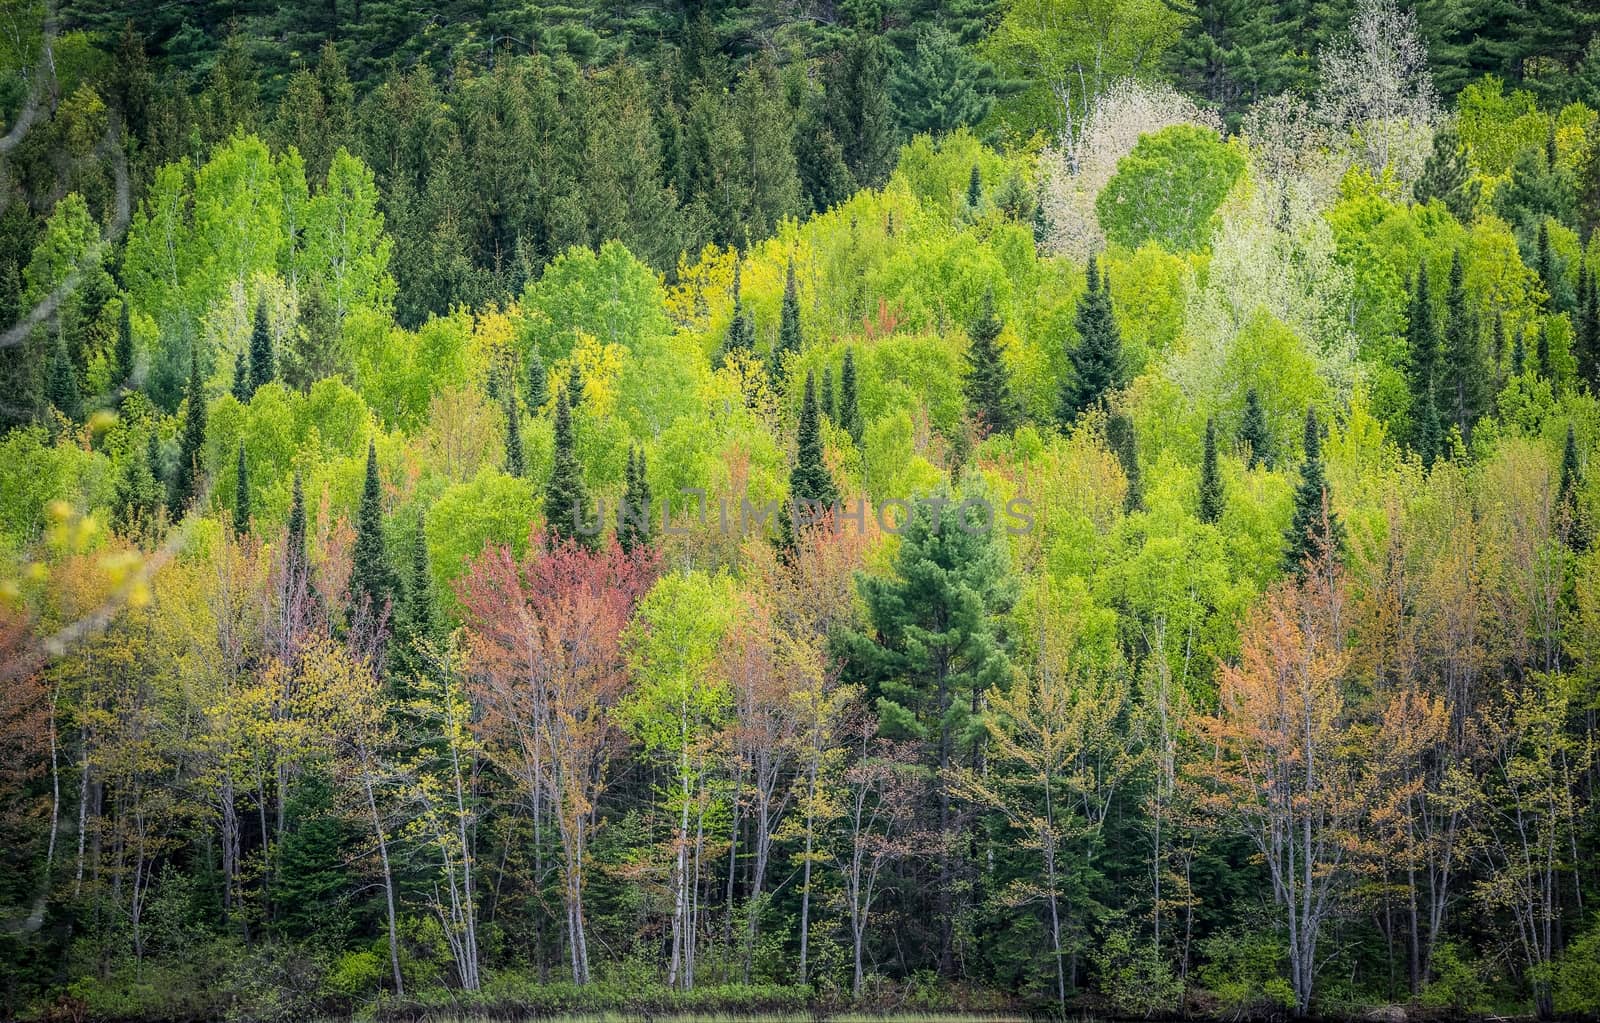 A mixture of deciduous and coniferous trees on a sloping hillside provide a staggered view of budding green forests.